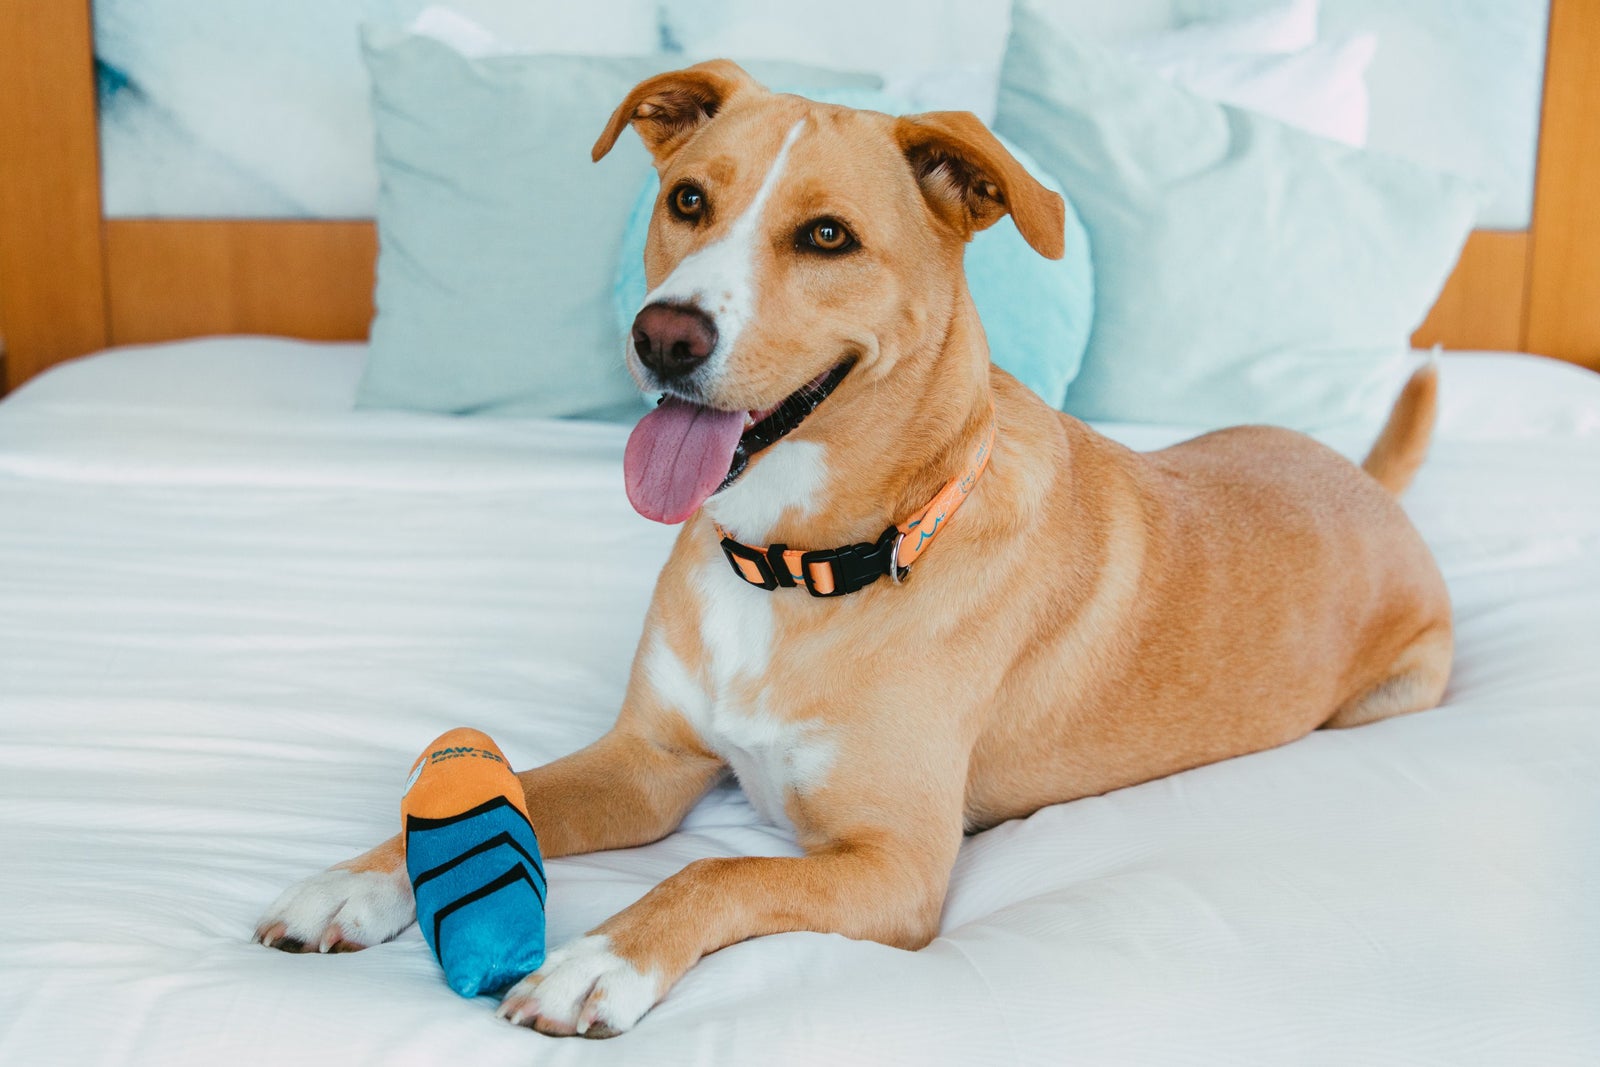 The 15 best dog-friendly hotels in the US you need to know about